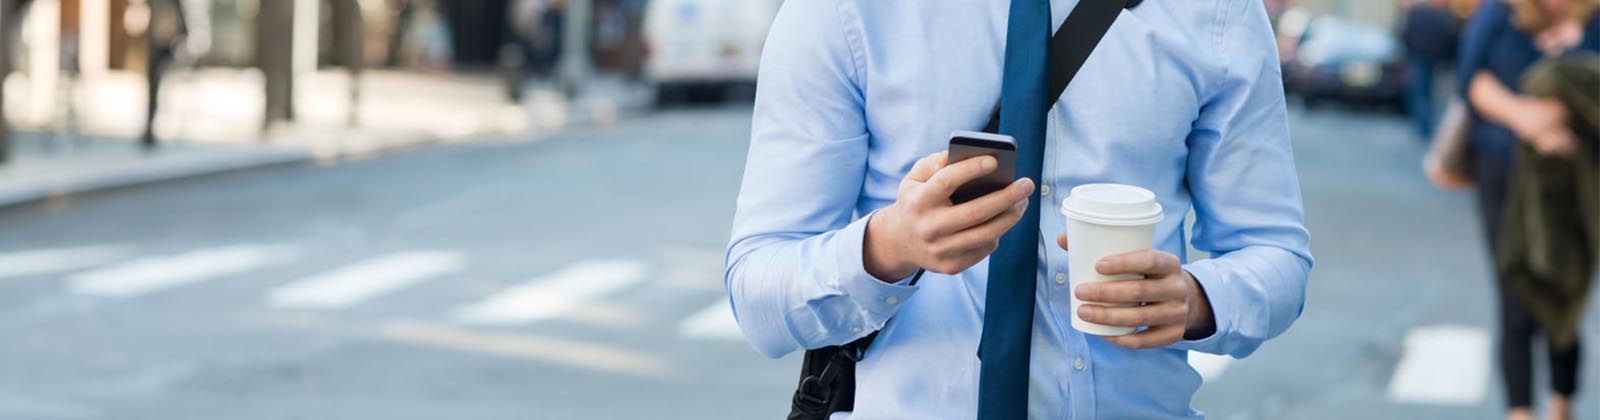 business man walking in the city while holding coffee and looking at mobile device